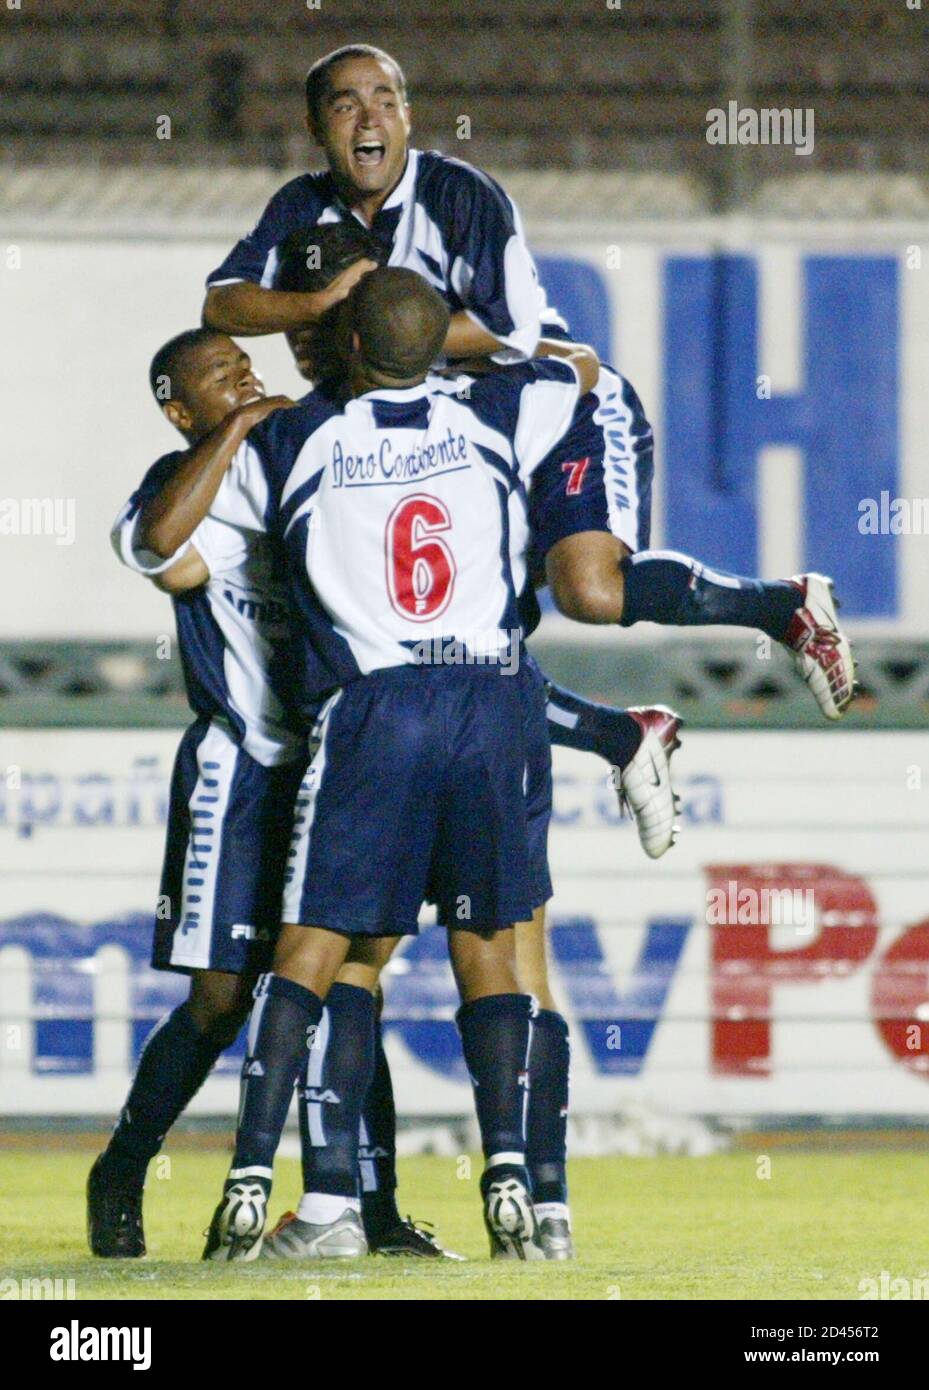 Marko Ciurlizza (top), and Junior Viza (back) from Alianza Lima celebrate  with teammates their first goal against Sporting Cristal, during the final  of the Peru's soccer championship at National stadium in Lima,